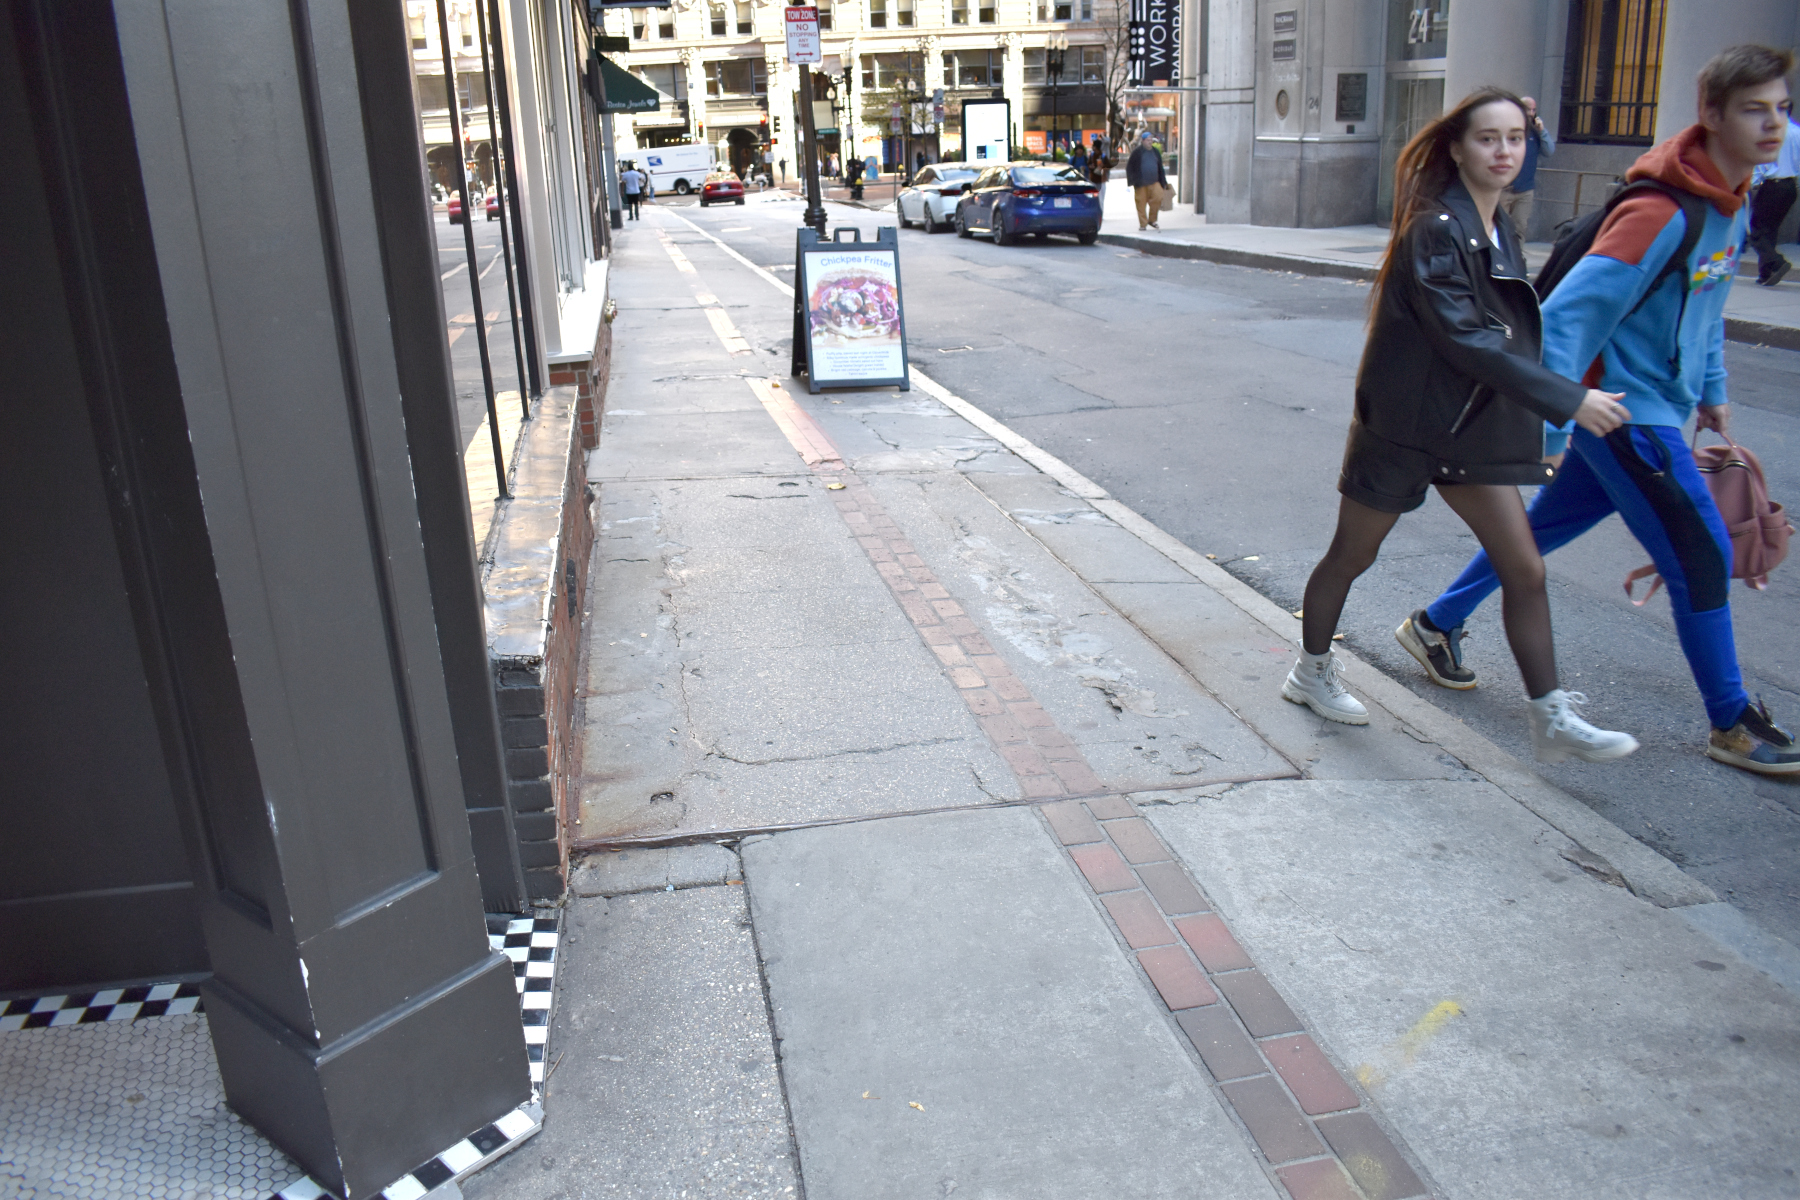 A man and an woman step off the curb on a sidewalk in downtown Boston. A row of red bricks running down the middle indicate the path of the Freedom Trail. In the center of the sidewalk is a large rectangular hatch that leads to the basement underlying the sidewalk.